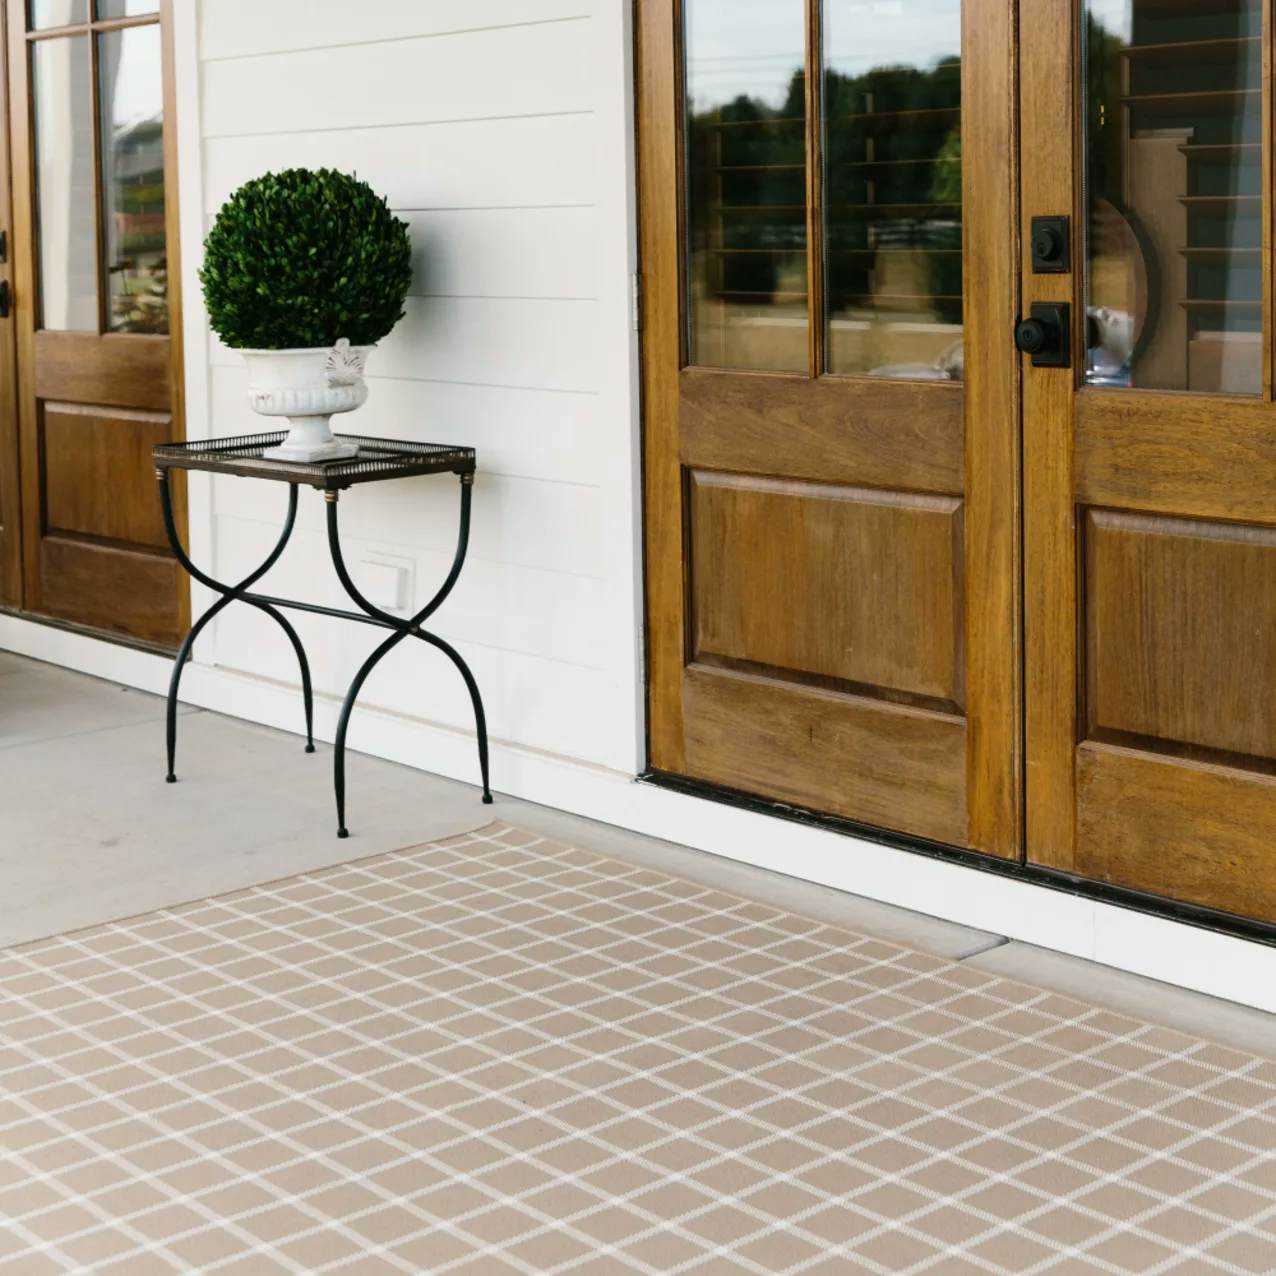 Sandpoint Beige Plaid outdoor entry way rug